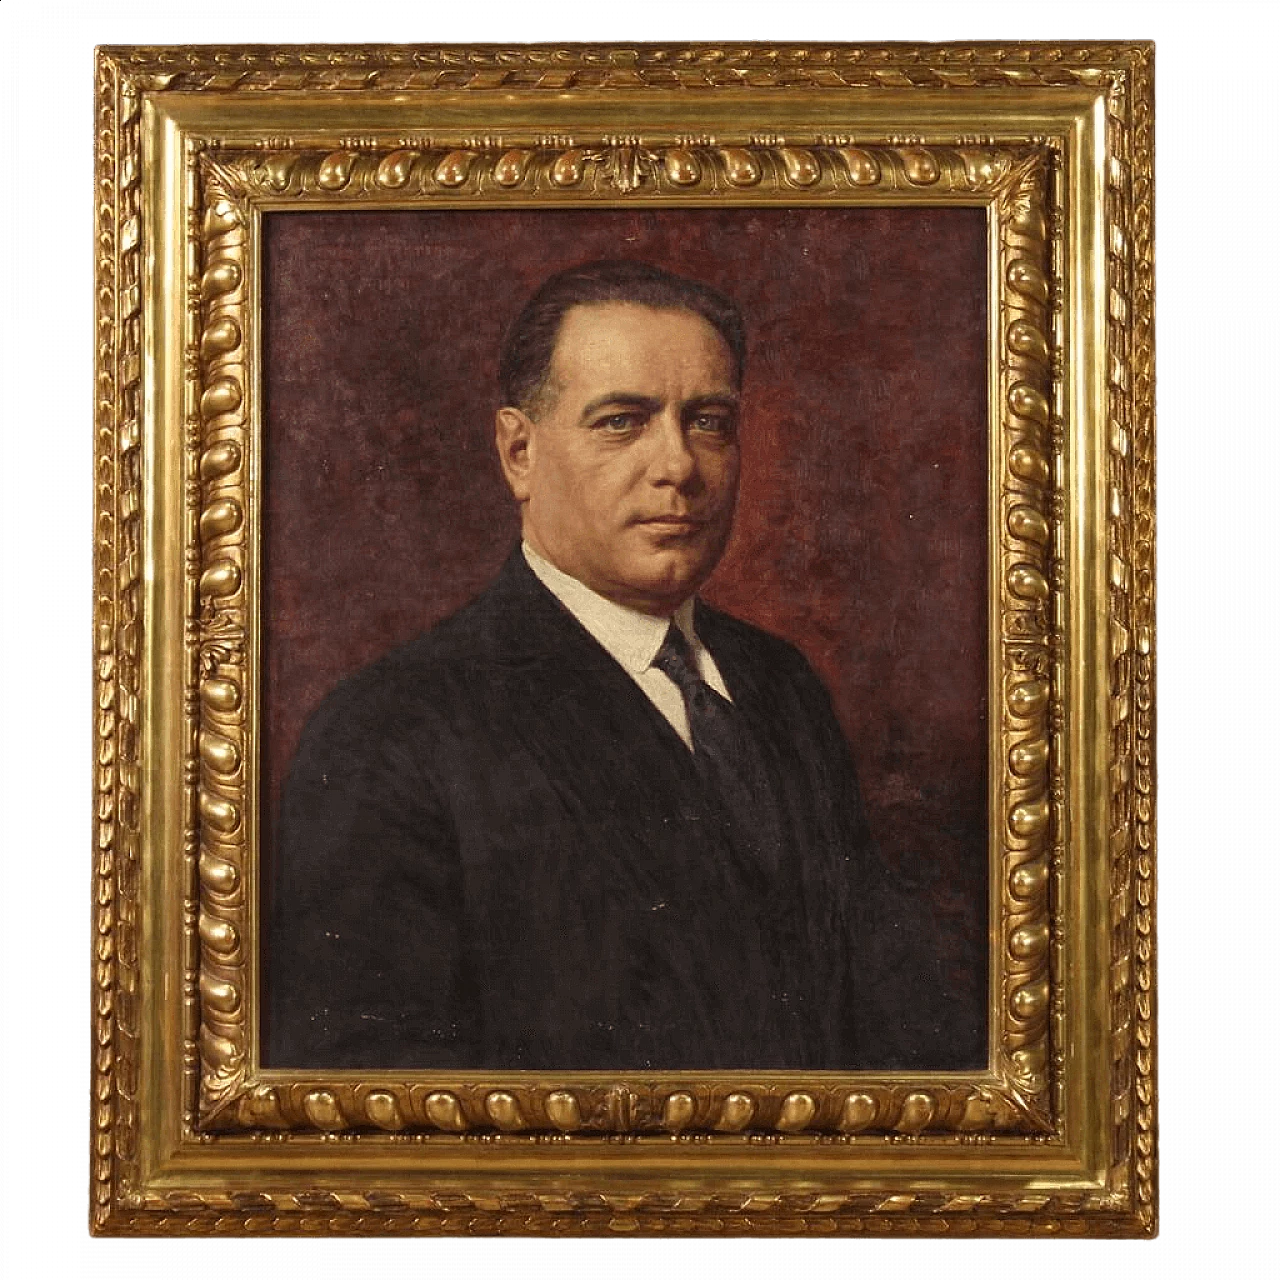 Angelo Garino, male portrait, oil painting on canvas, 1931 16